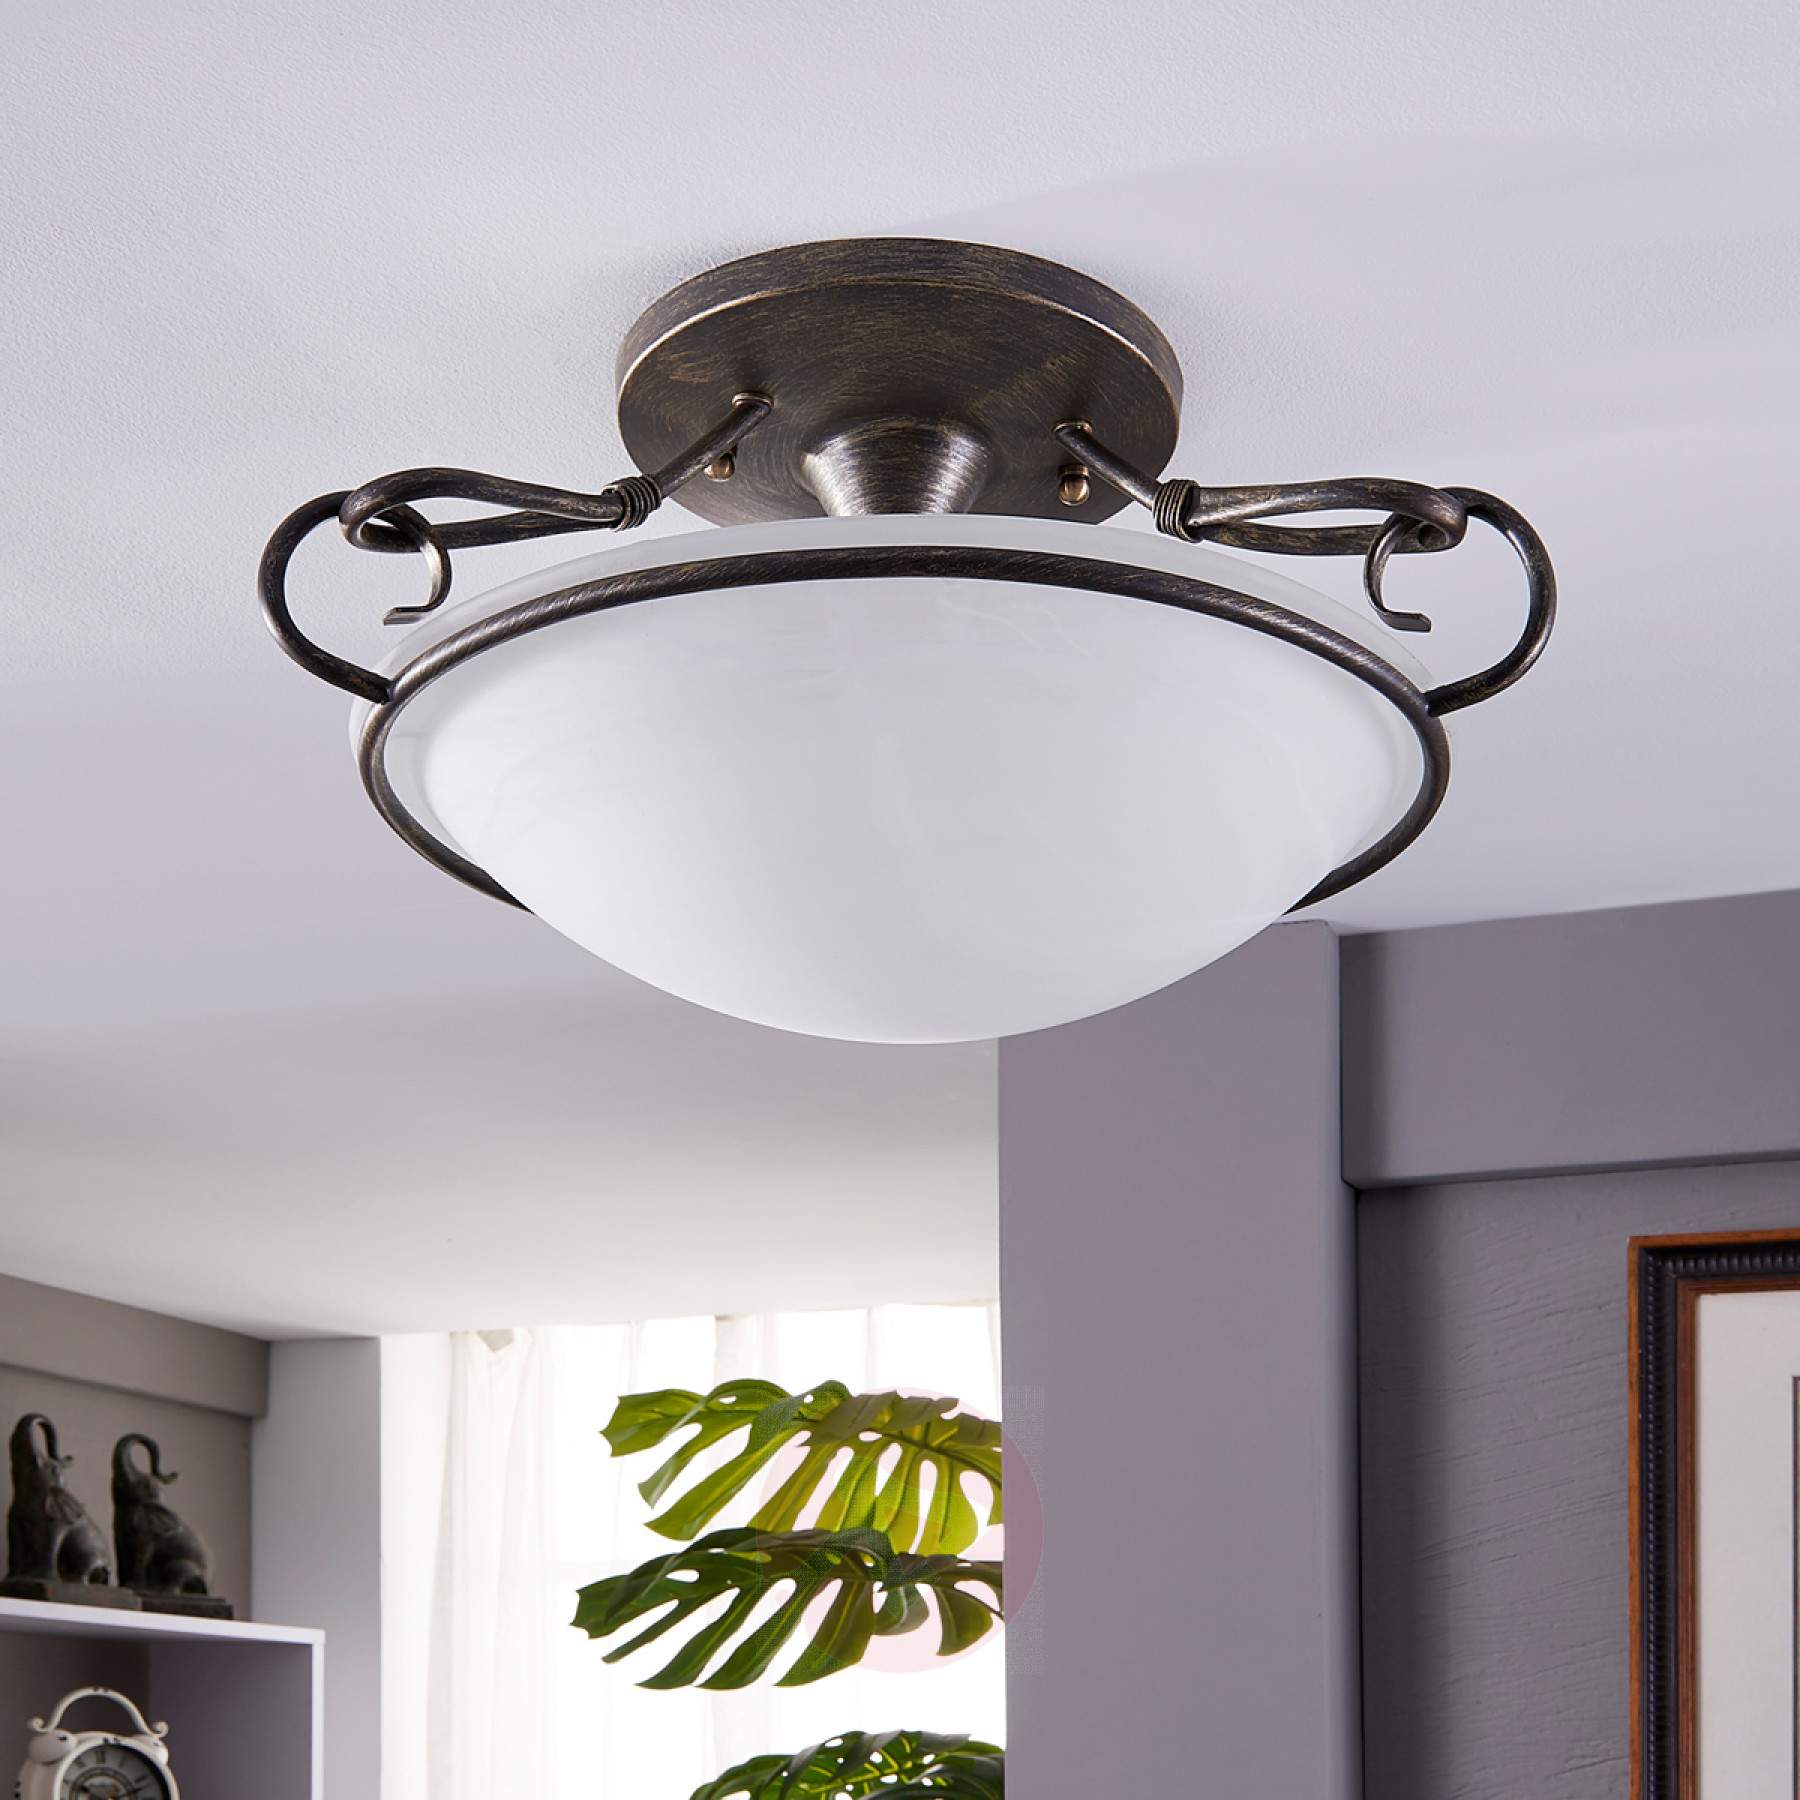 country house lighting stylish rando ceiling lamp in country-house style-9620989-03 ... SGUHDUL